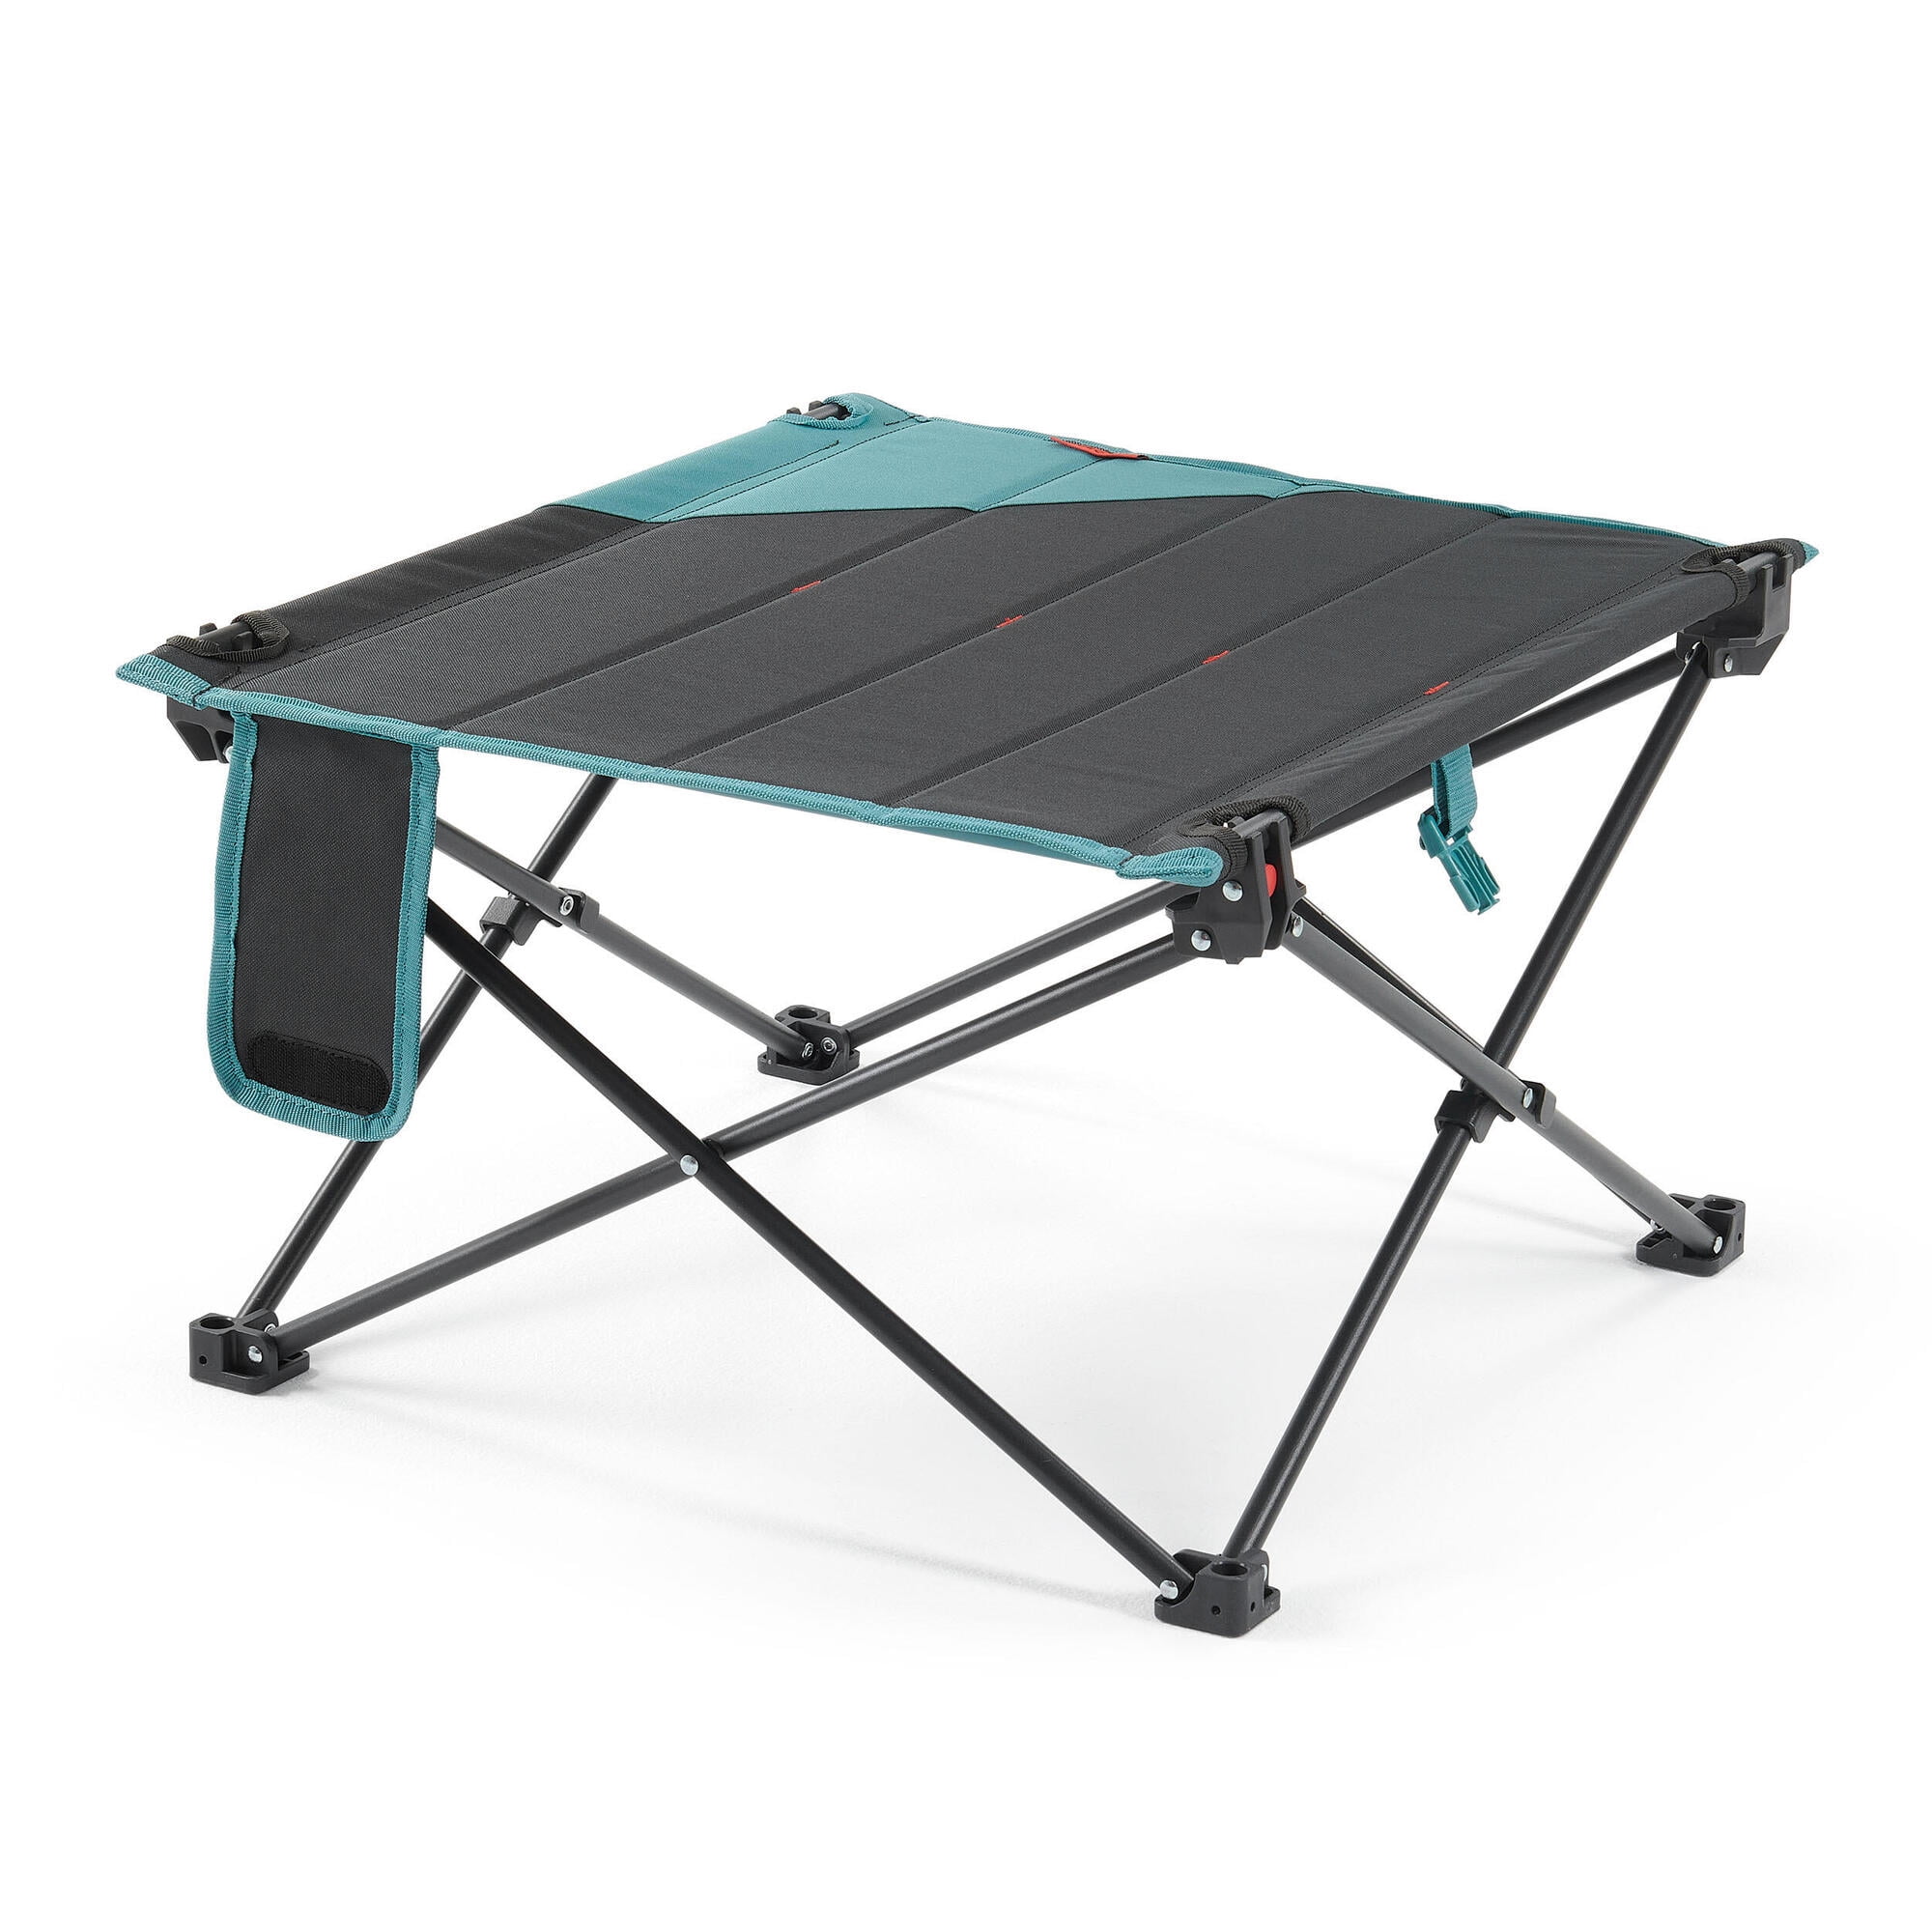 Boat Hard-Topped Folding Table in a Bag for Picnic Useful for Dining & Cooking with Burner Camp Beach Trekology Portable Camping Tables with Aluminum Table Top Certified Refurbished Easy to Clean